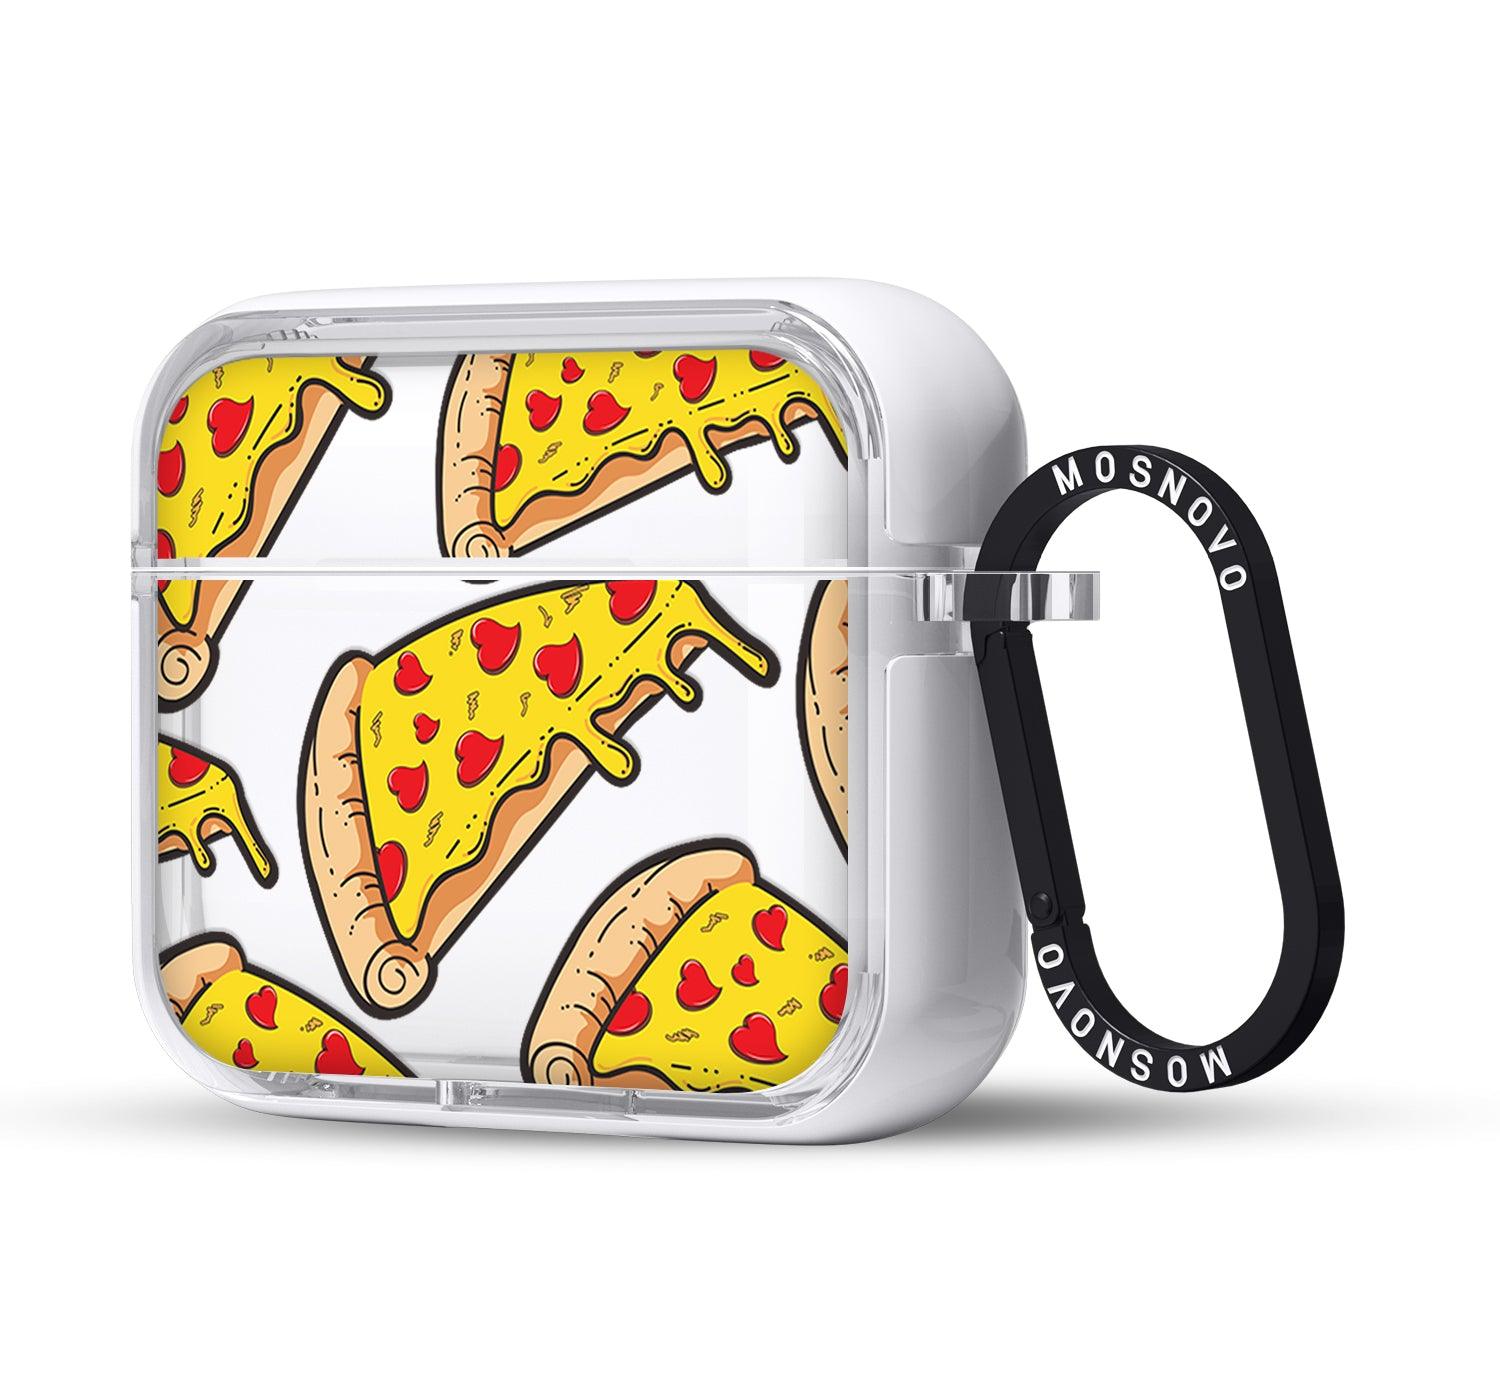 Pizza AirPods 3 Case (3rd Generation) - MOSNOVO